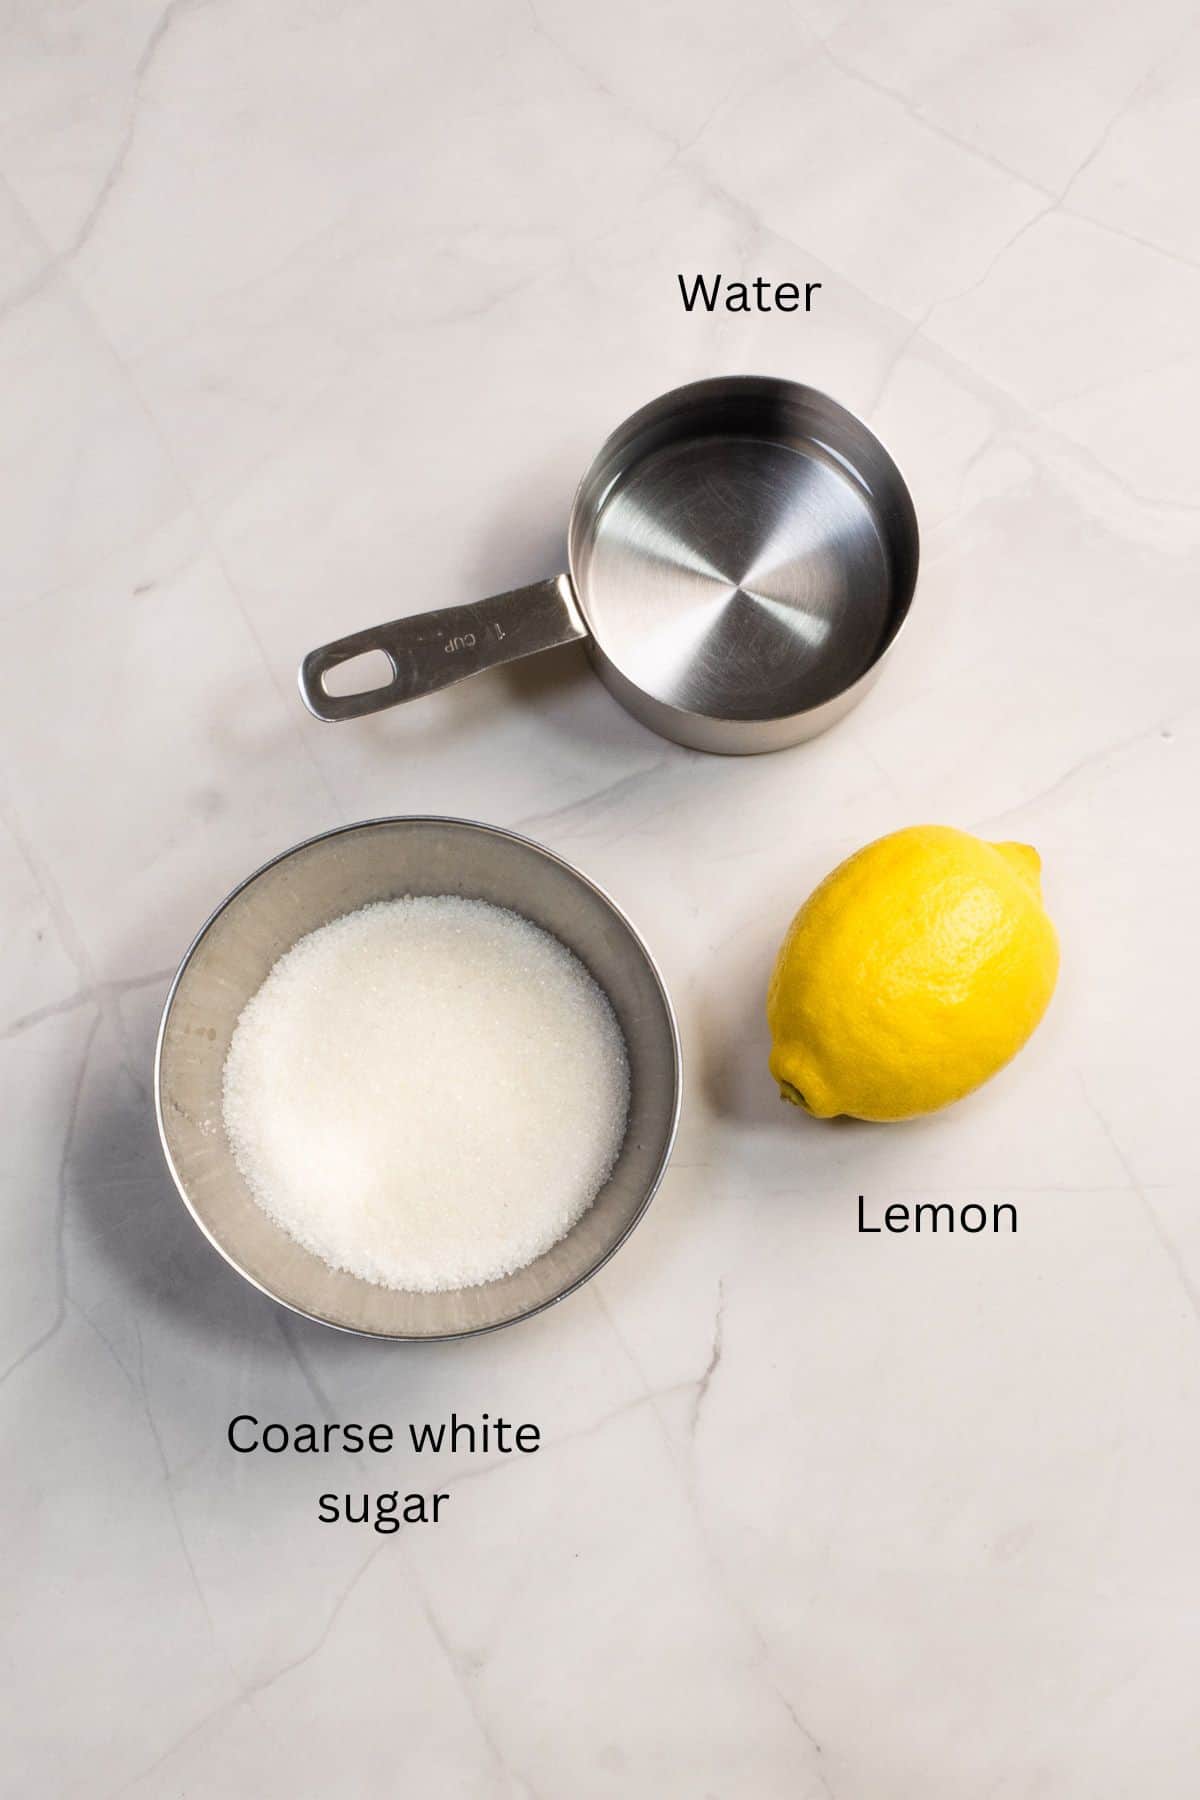 A lemon, a cup of water and a bowl of sugar against marble background.